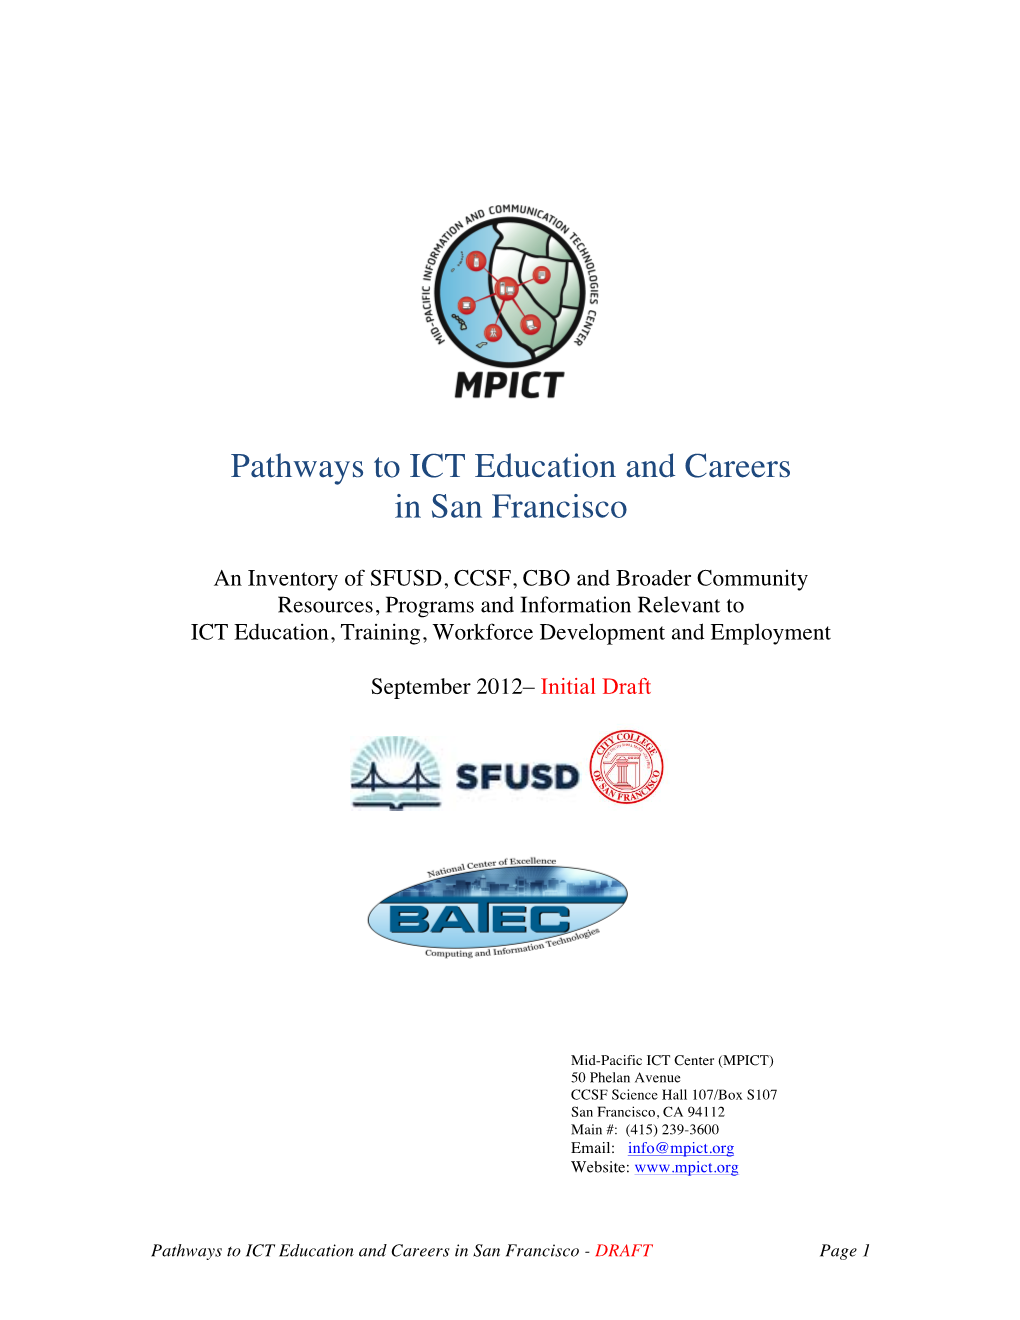 Pathways to ICT Education and Careers in San Francisco